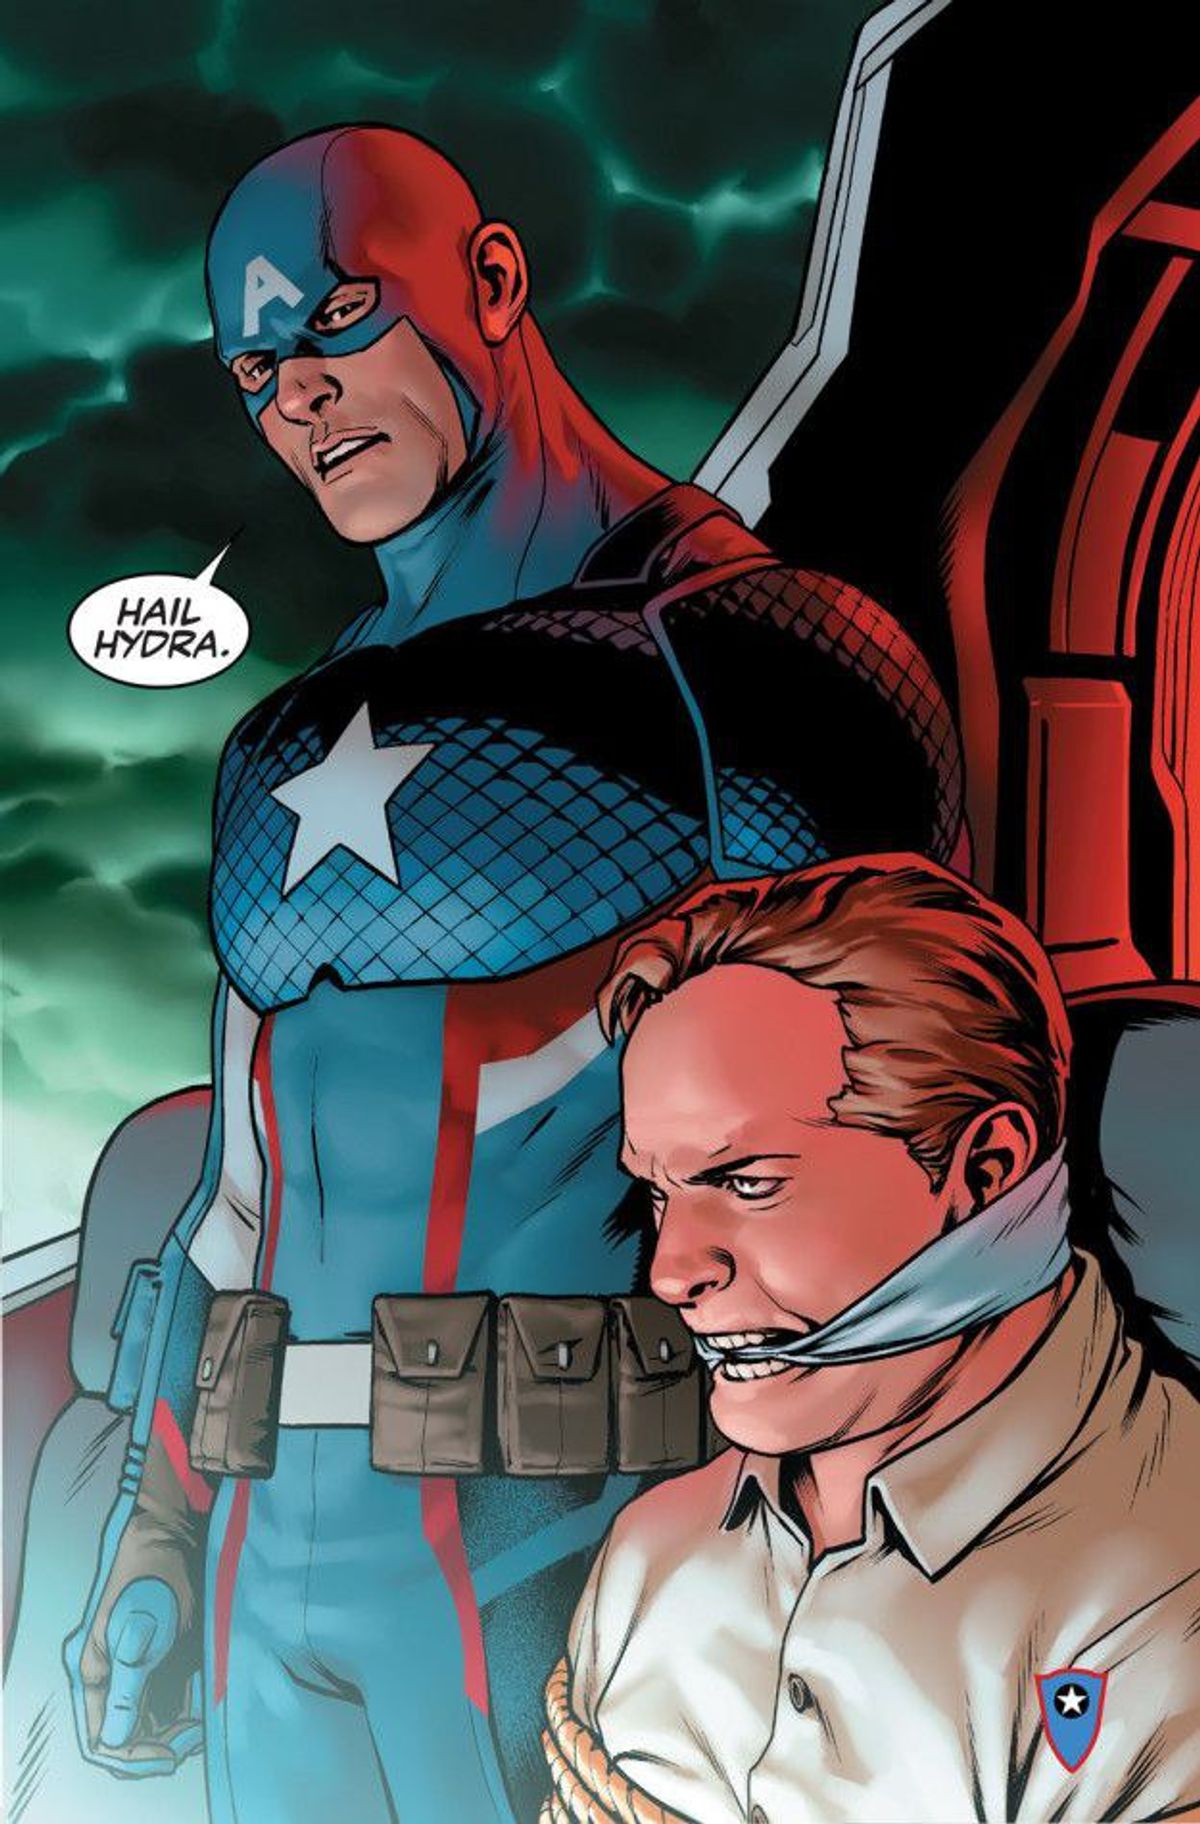 Steve Rogers Is A Hydra Agent: Why It's Not OK